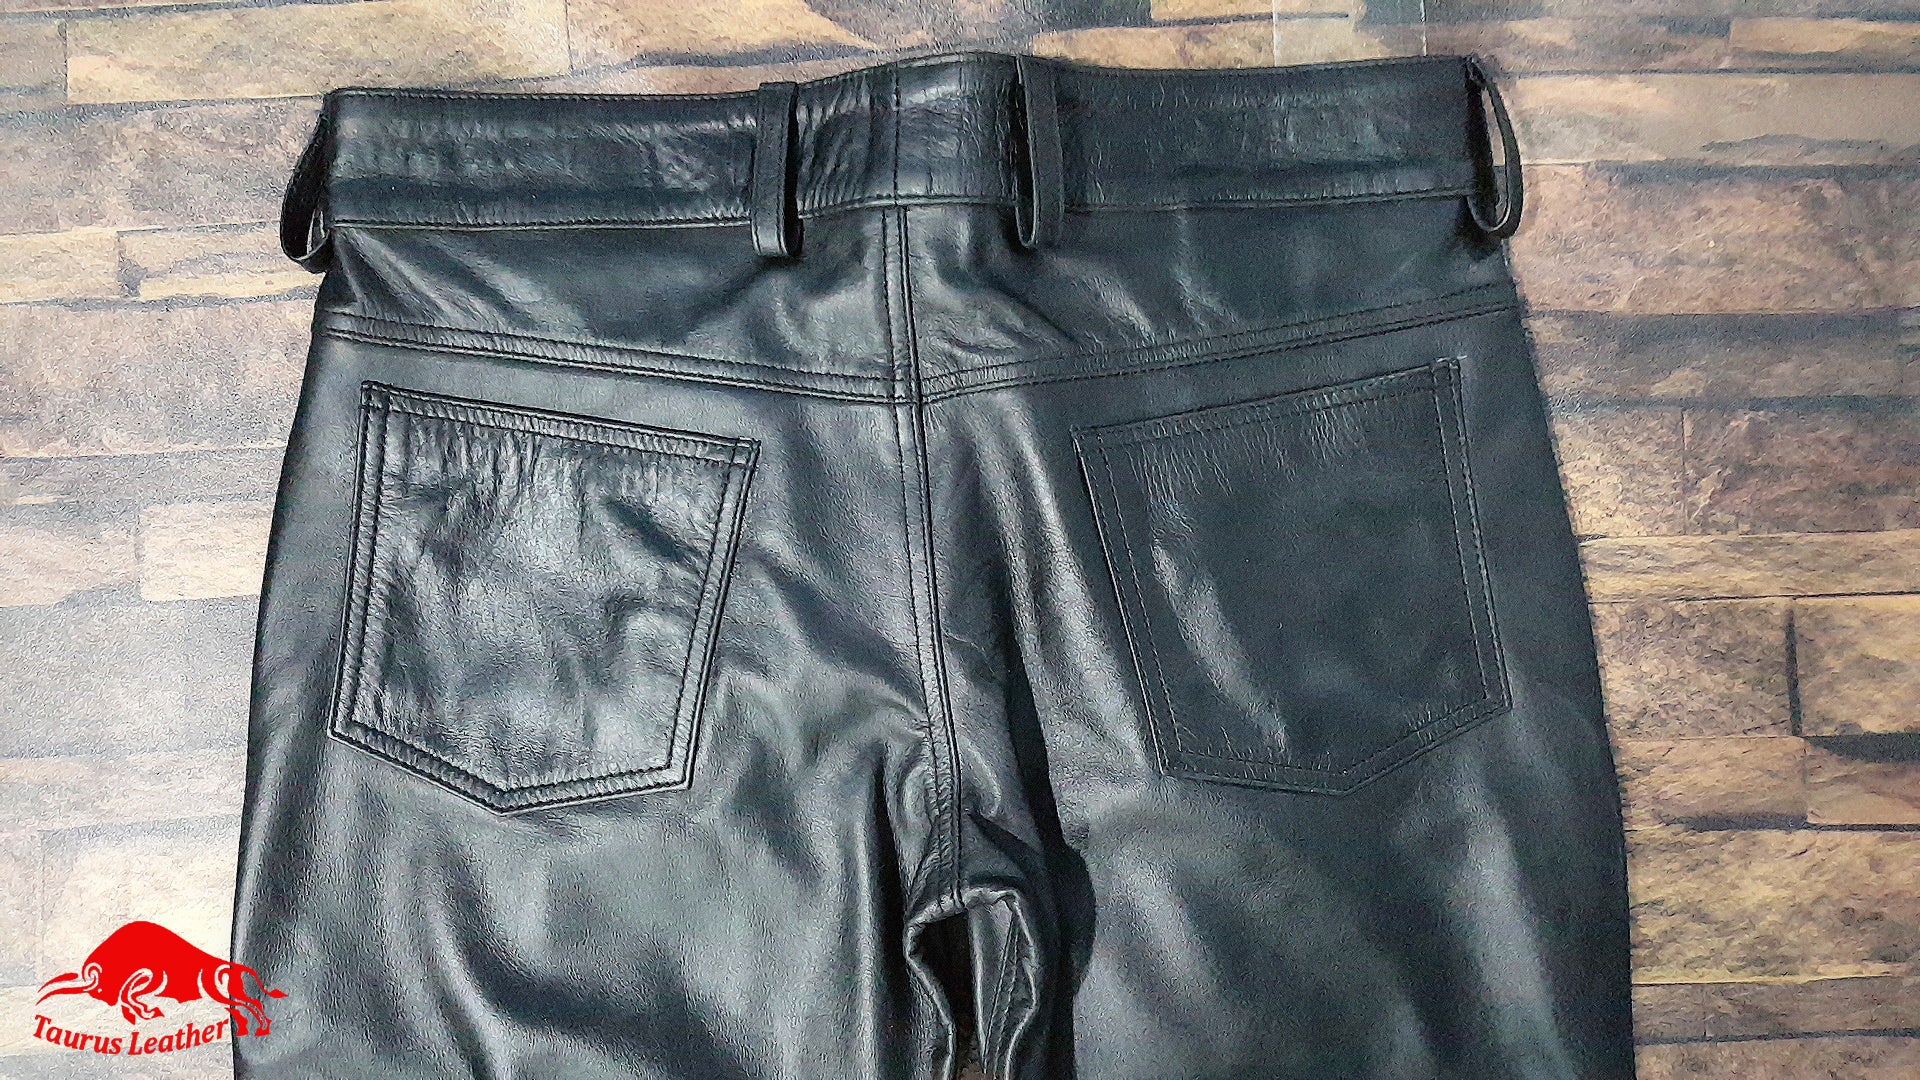 TAURUS LEATHER 501 Cow Leather Black Pant